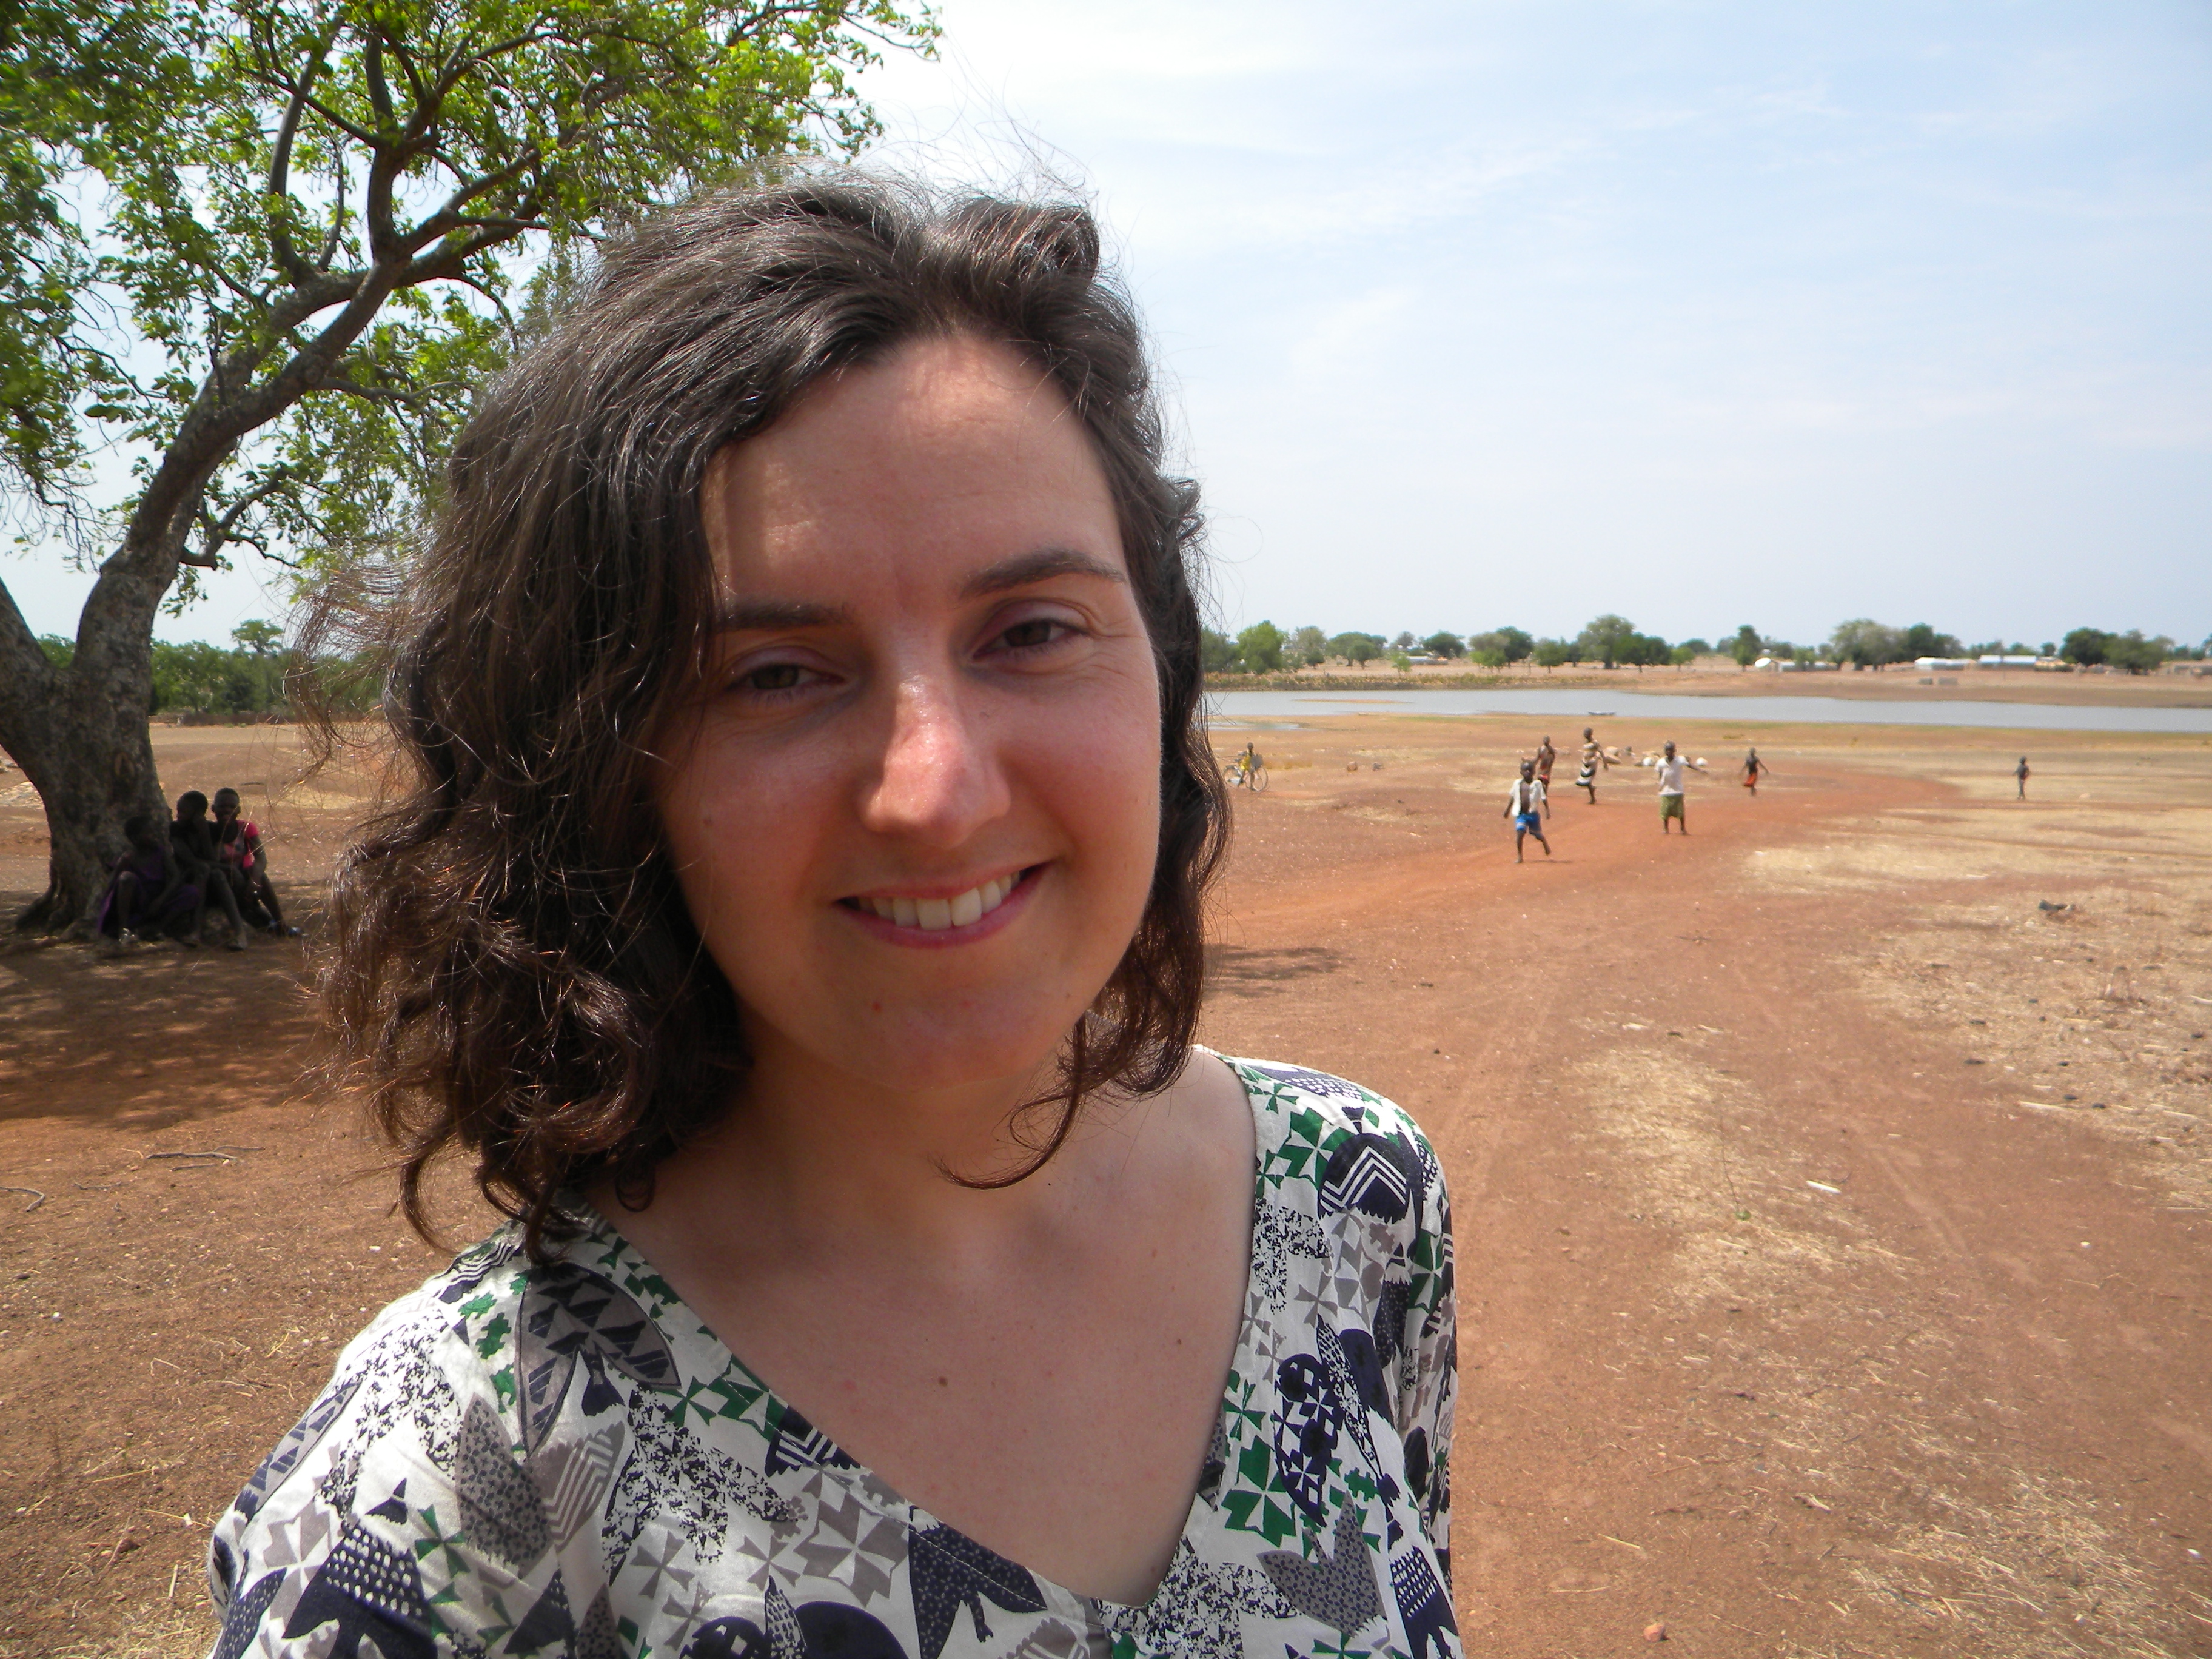 Sarah in Burkina Faso, collecing data on farming practices, water and land management around small reservoirs